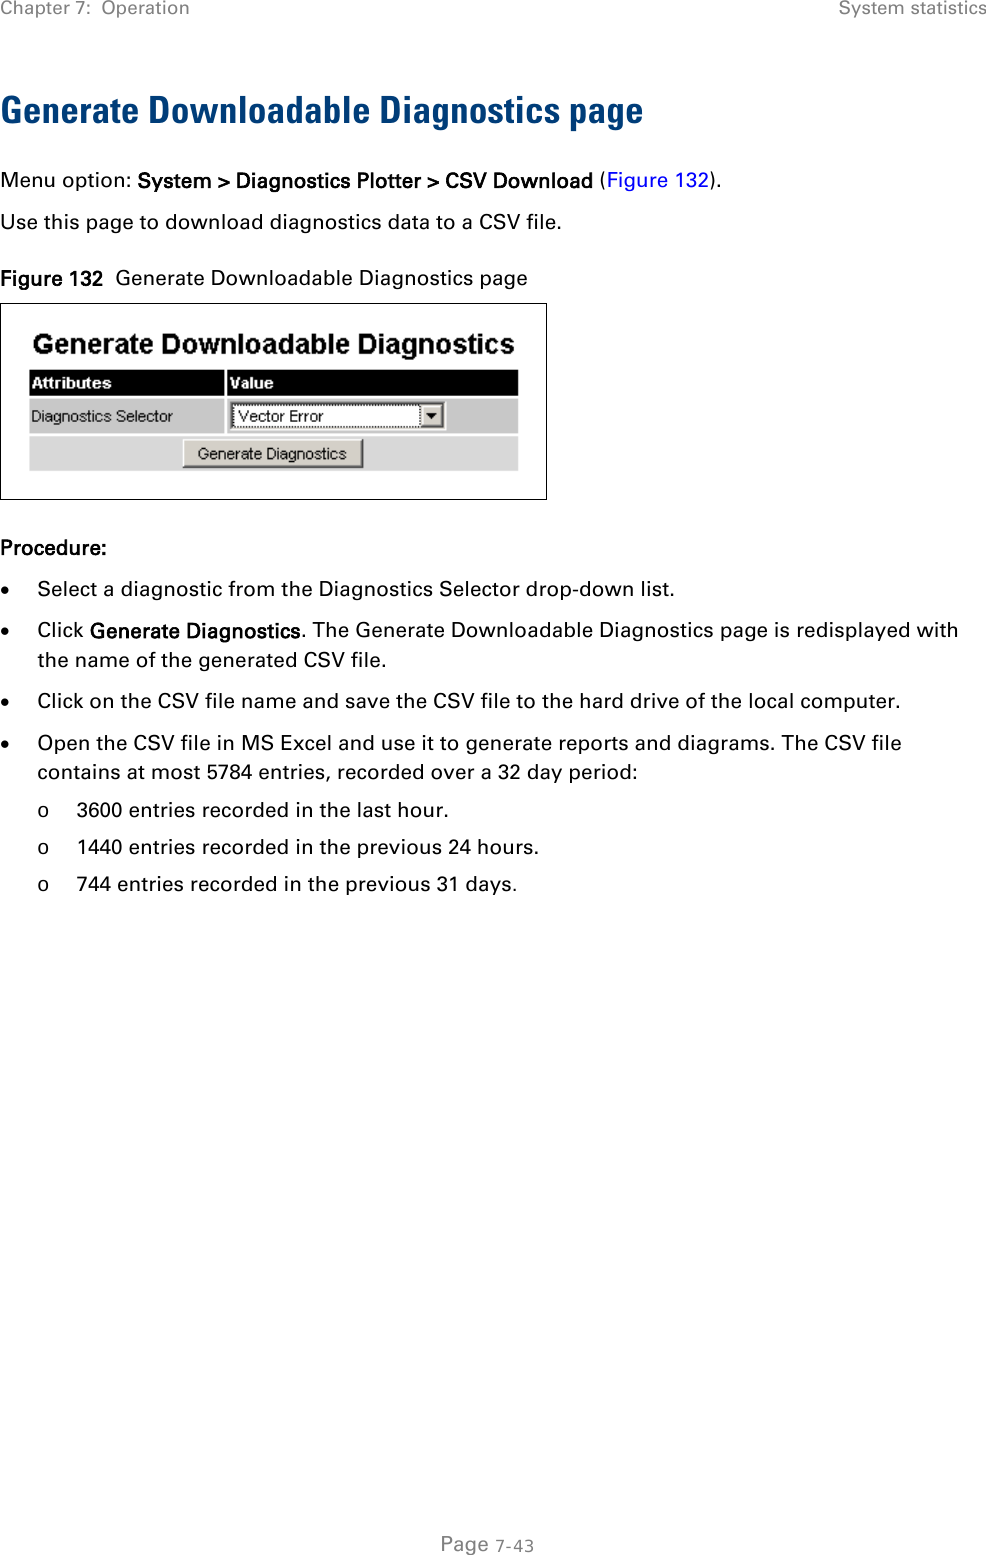 Chapter 7:  Operation System statistics  Generate Downloadable Diagnostics page Menu option: System &gt; Diagnostics Plotter &gt; CSV Download (Figure 132). Use this page to download diagnostics data to a CSV file. Figure 132  Generate Downloadable Diagnostics page  Procedure: • Select a diagnostic from the Diagnostics Selector drop-down list. • Click Generate Diagnostics. The Generate Downloadable Diagnostics page is redisplayed with the name of the generated CSV file. • Click on the CSV file name and save the CSV file to the hard drive of the local computer. • Open the CSV file in MS Excel and use it to generate reports and diagrams. The CSV file contains at most 5784 entries, recorded over a 32 day period: o 3600 entries recorded in the last hour. o 1440 entries recorded in the previous 24 hours. o 744 entries recorded in the previous 31 days.    Page 7-43 